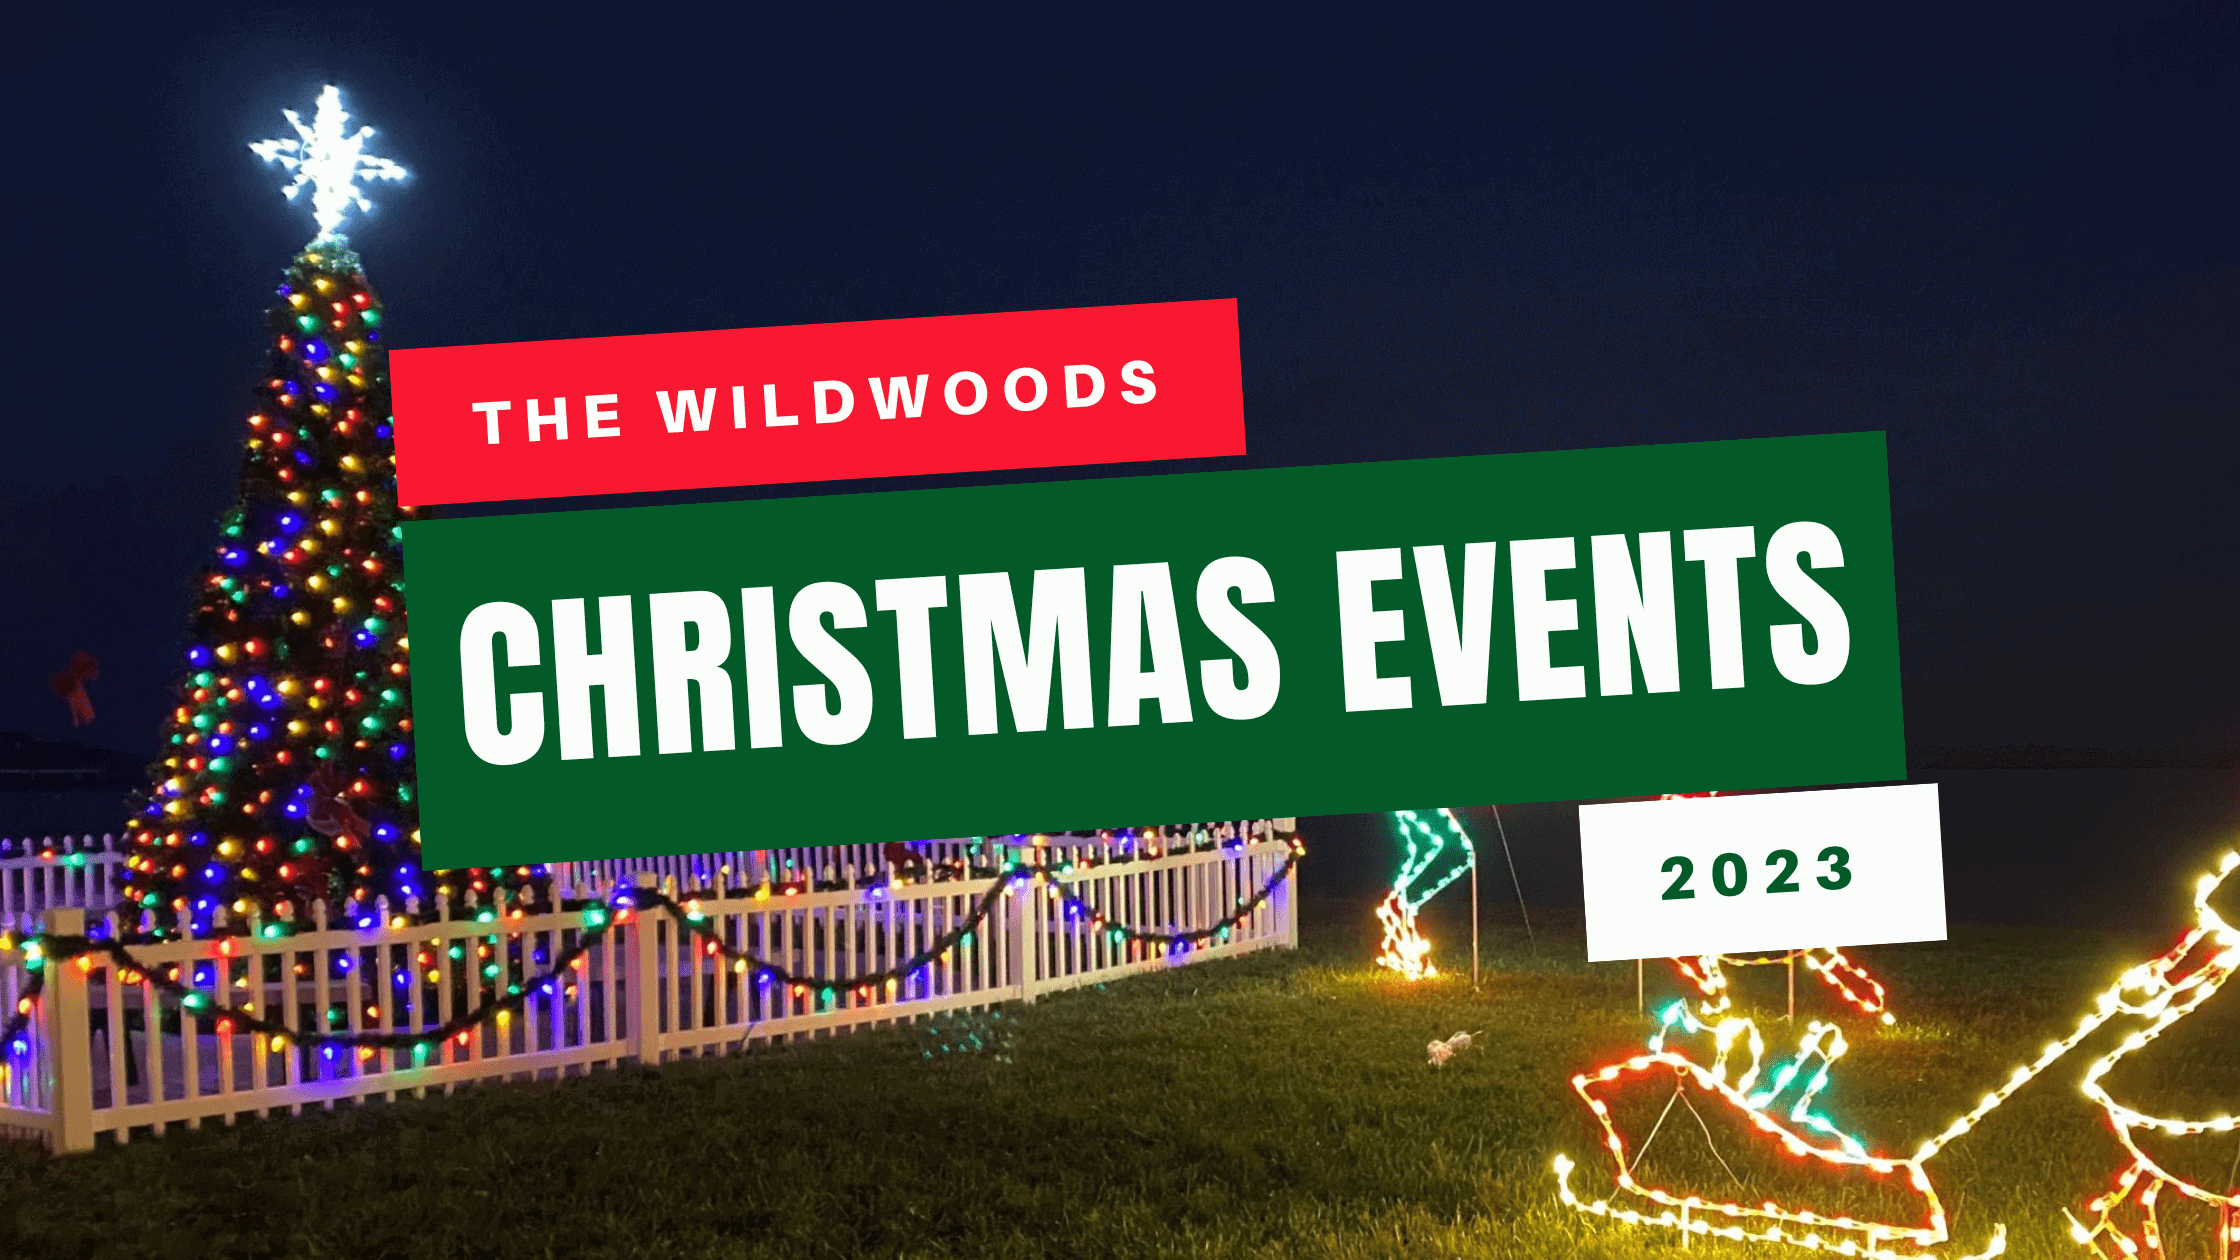 The Wildwoods Christmas Events 2023